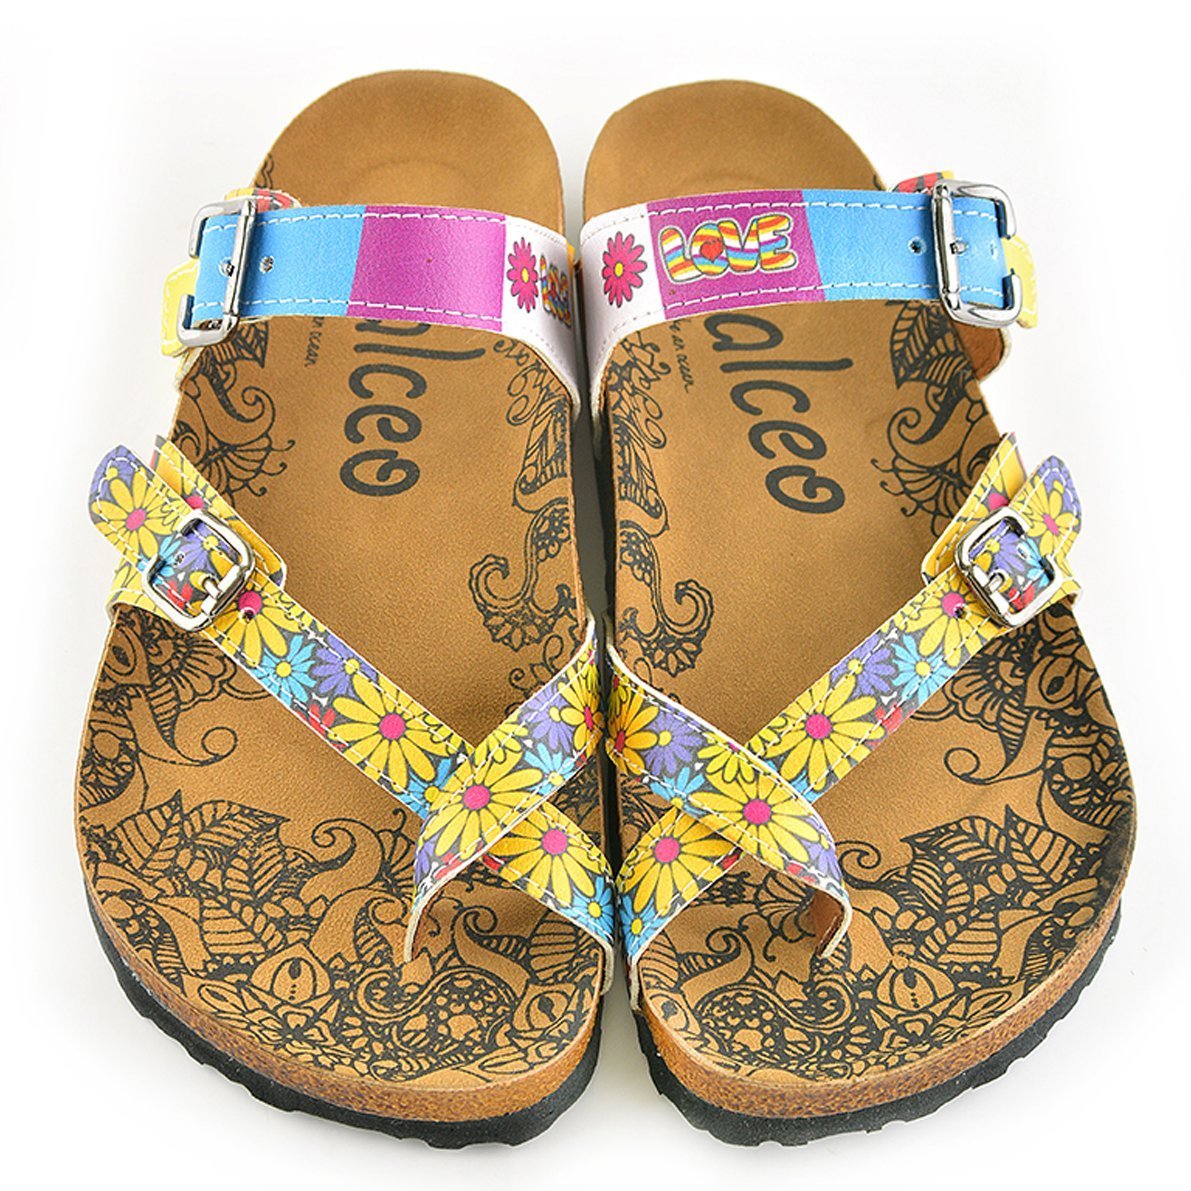 Calceo.co - Produces Sandals & Clogs & Slipers and Shoes